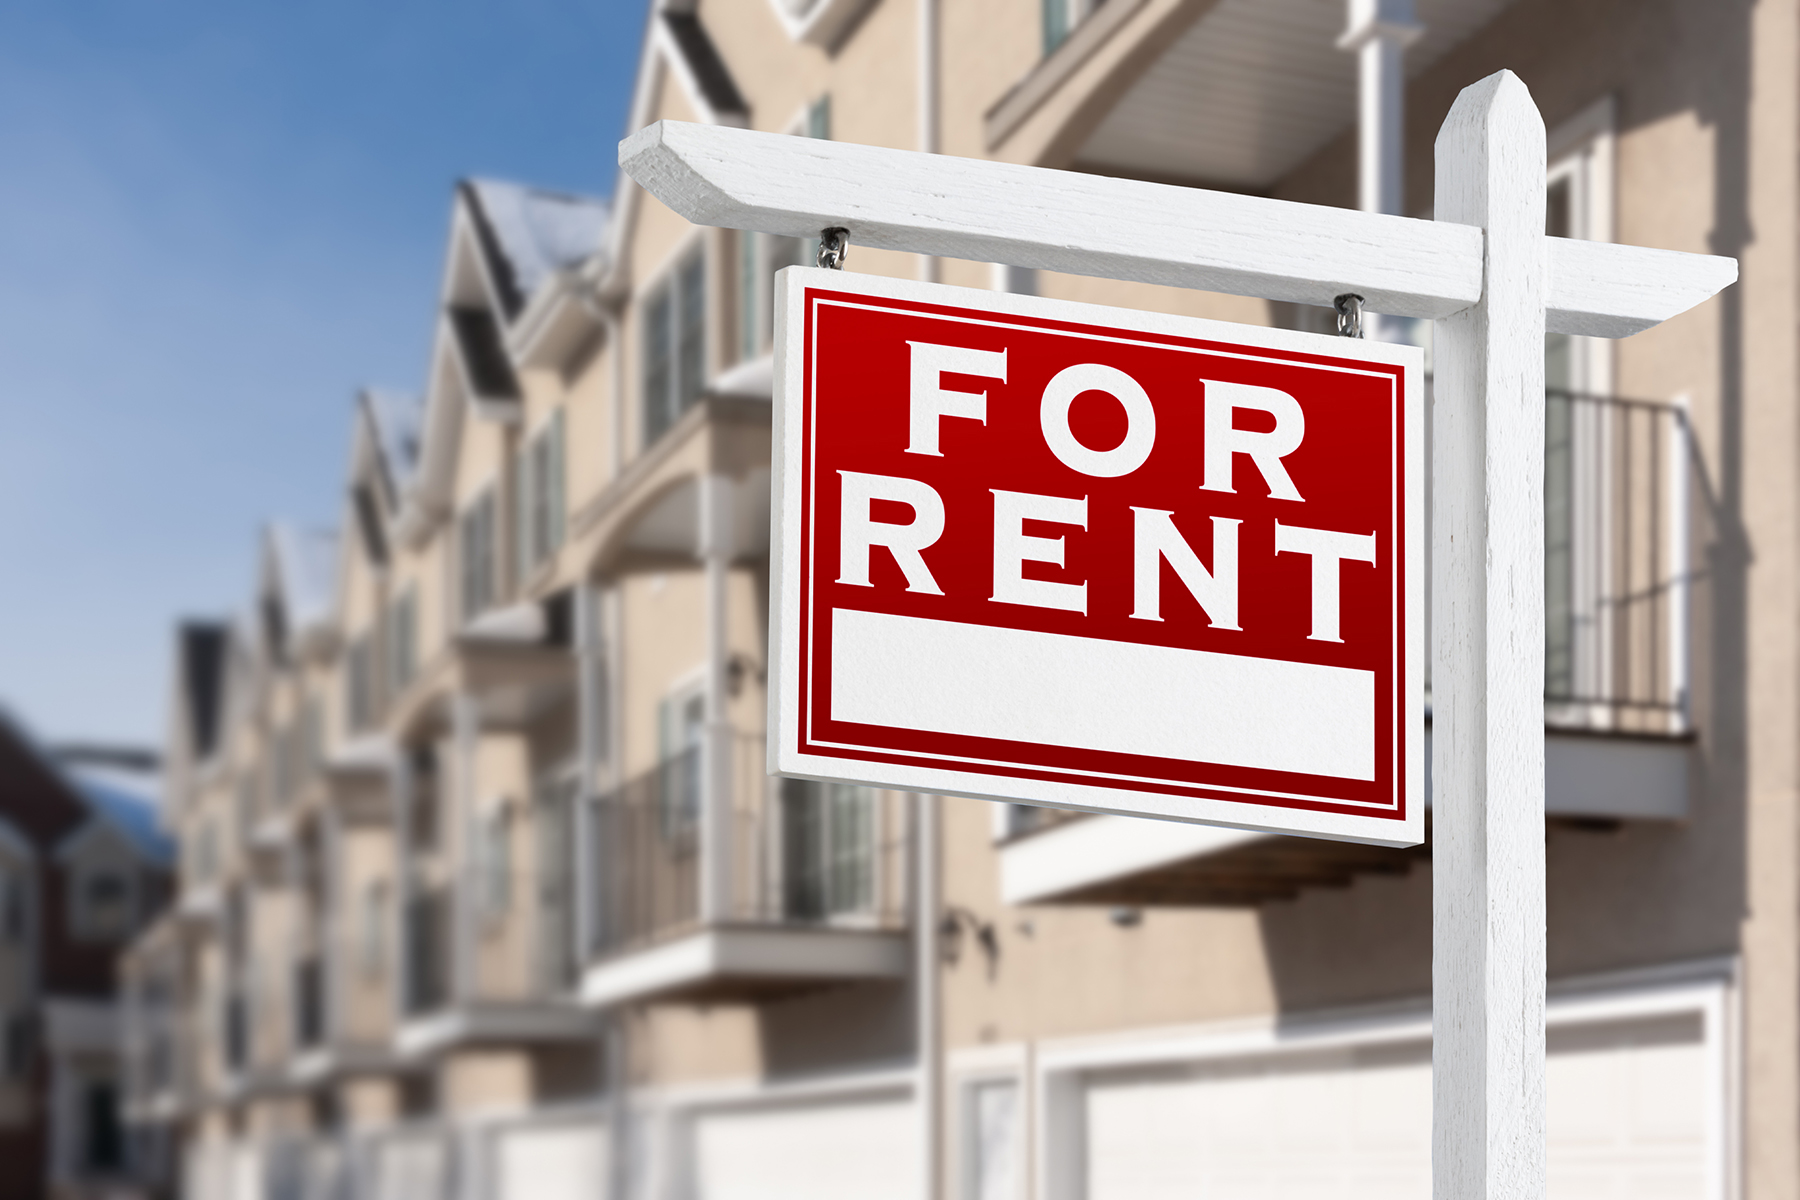 For Rent Real Estate Sign In Front of a Row of Apartment Condominiums Balconies and Garage Doors.